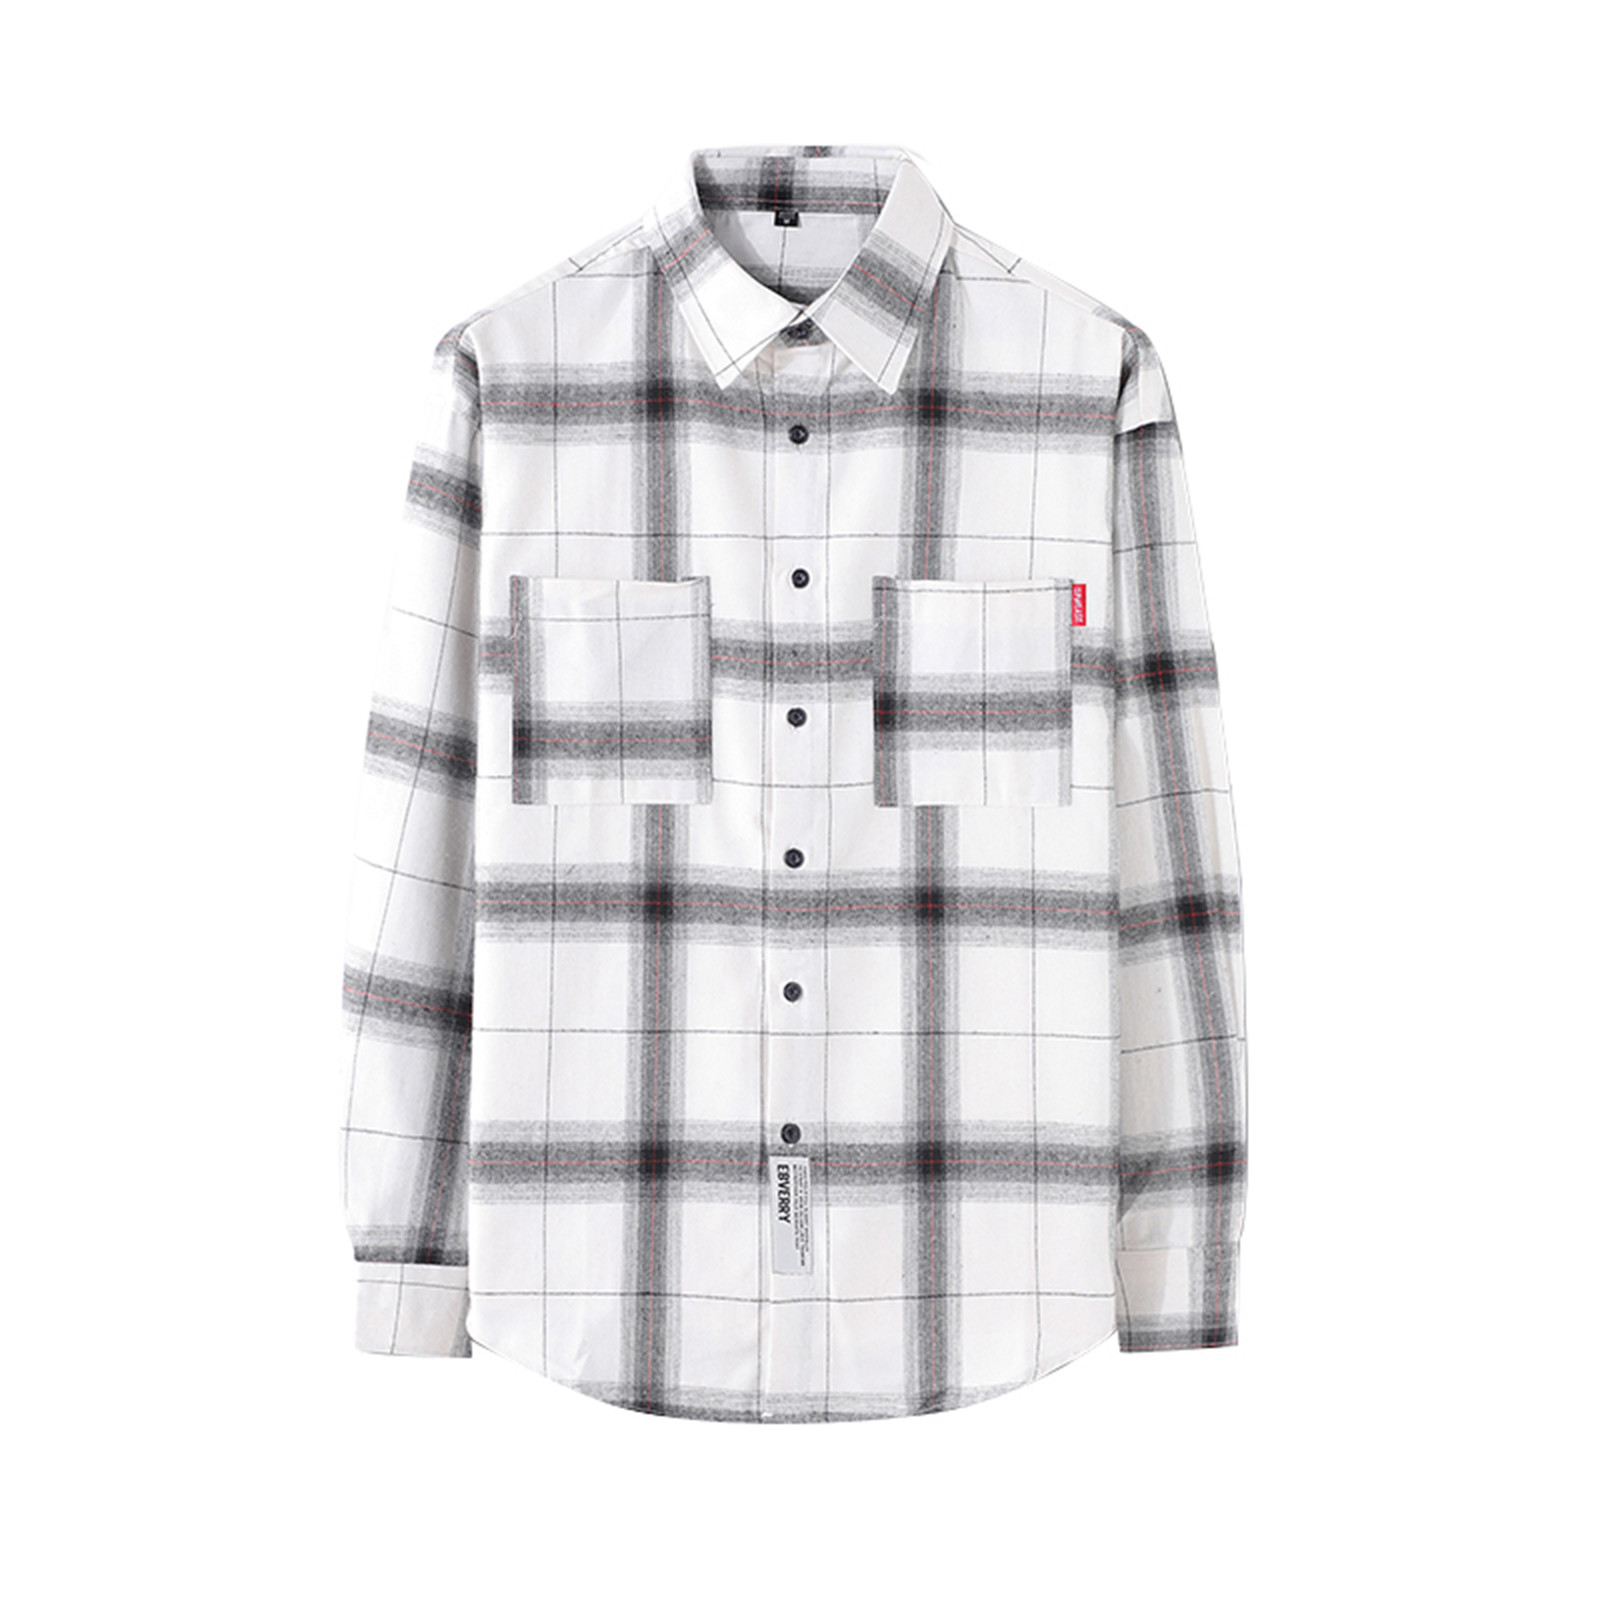 Teissuly The New Men's Regular-fit Long-Sleeve Plaid Flannel Shirt ...